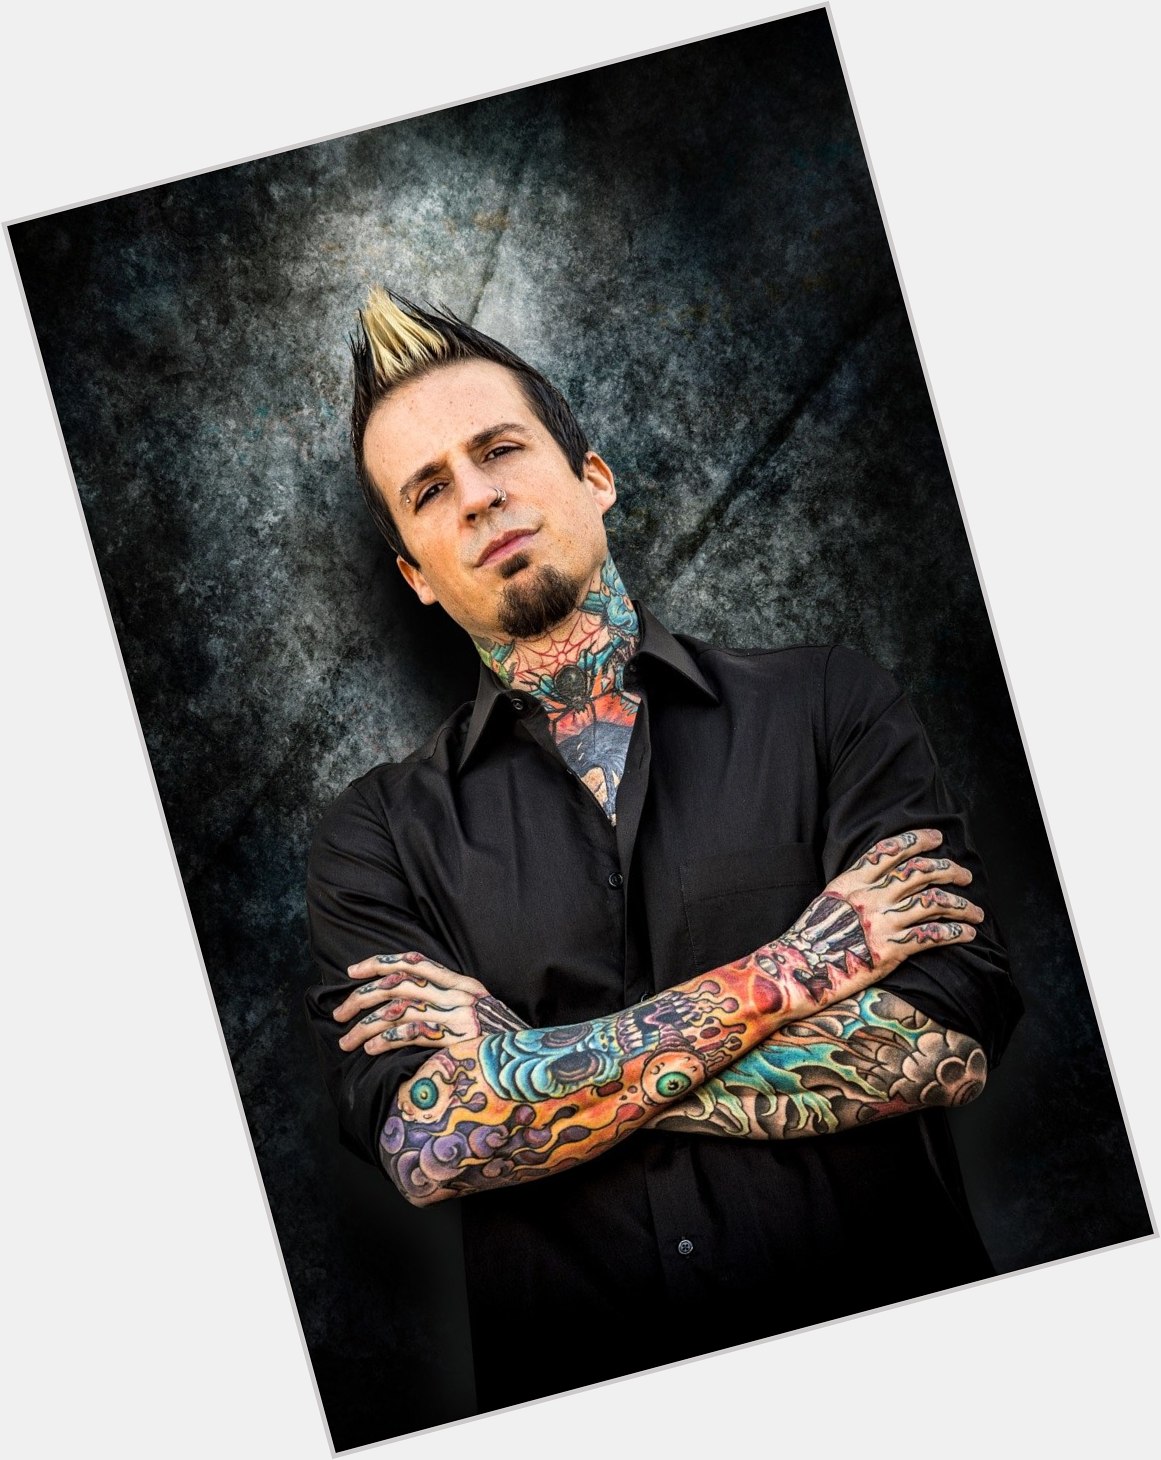 Jeremy Spencer  bald hair & hairstyles